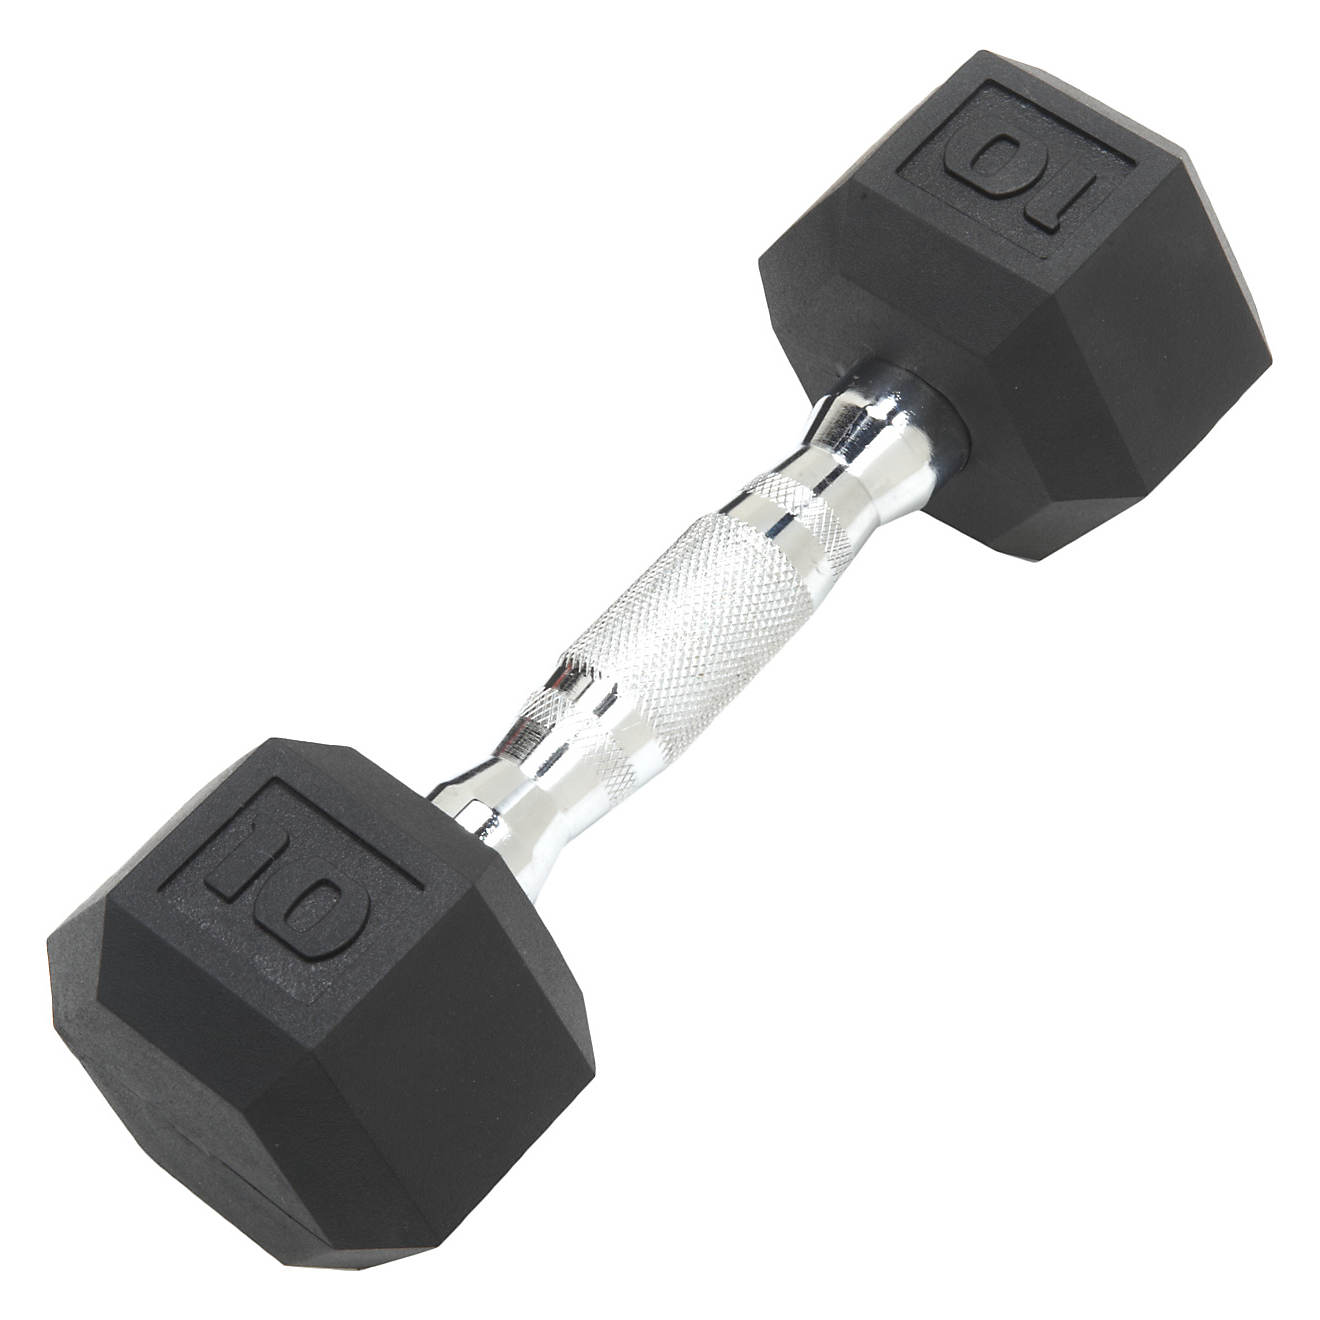 DROP SHIP SDPP-020 - CAP Barbell PVC Coated Hex Dumbbell Weights Black 10 pound Pair Inc